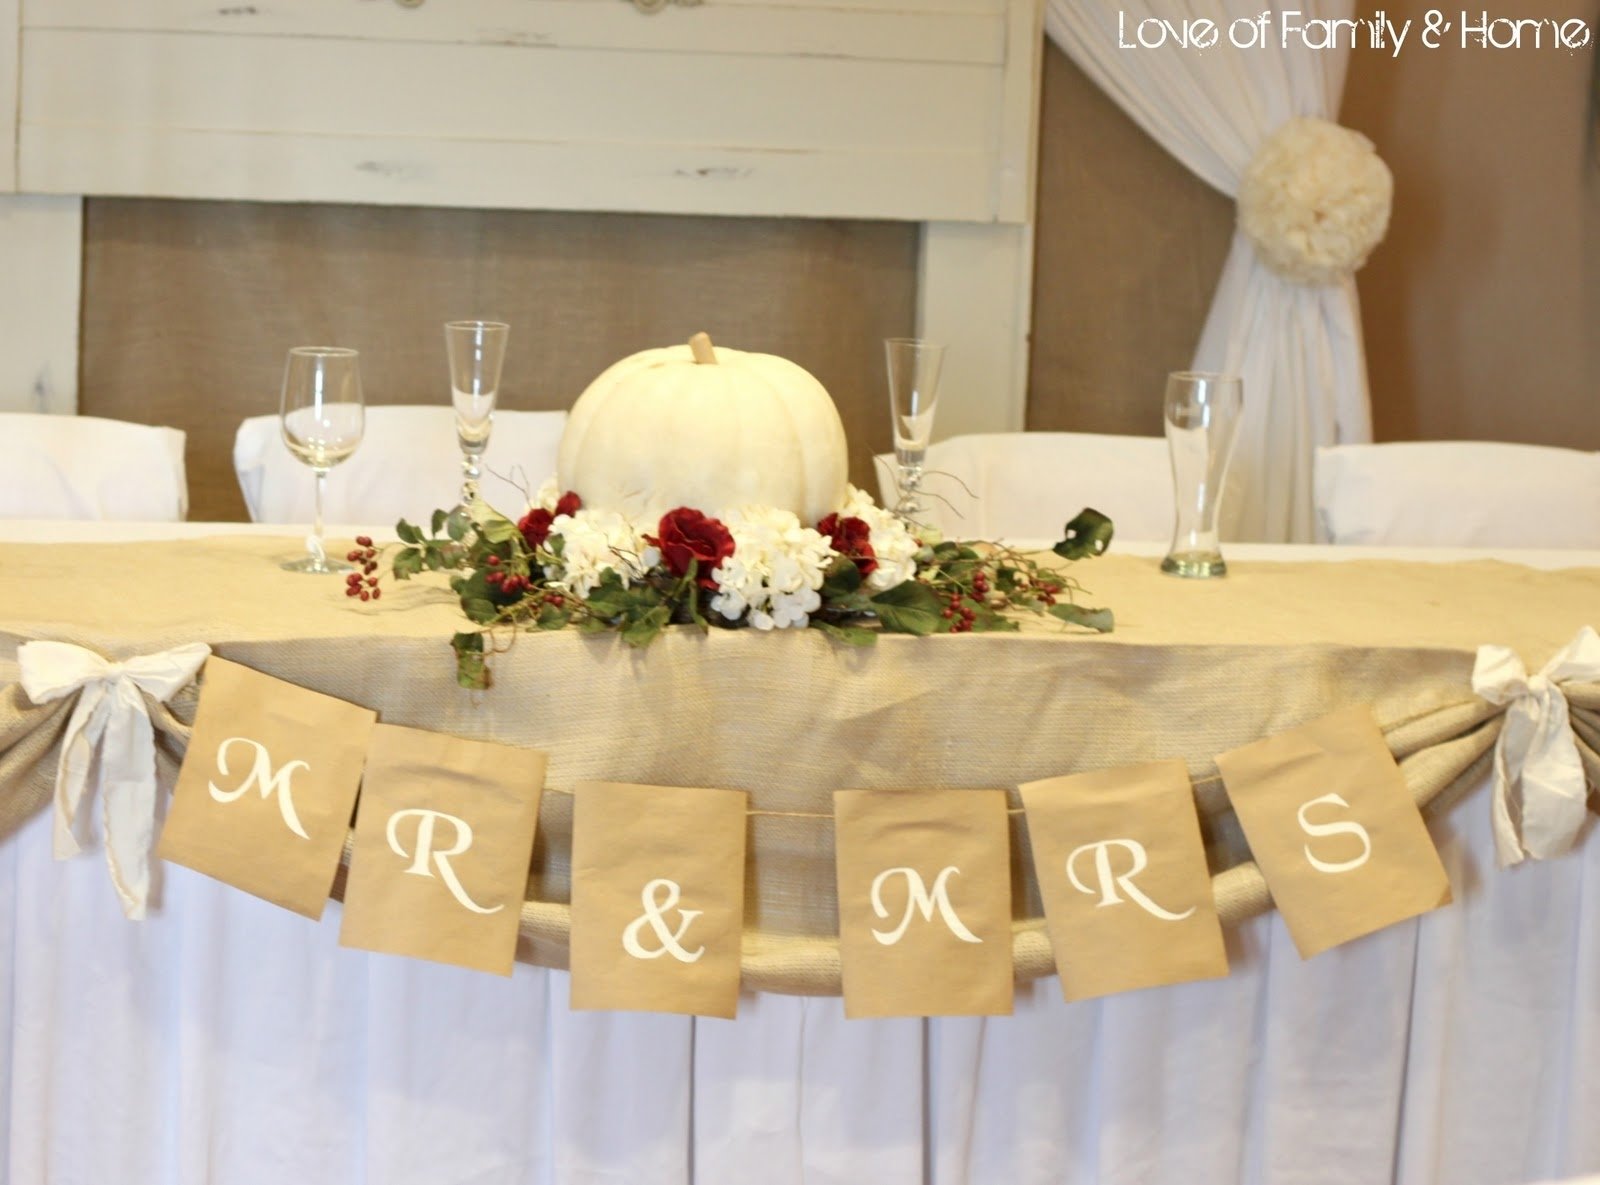 10 Attractive Weddings On A Budget Ideas do it yourself weddings rustic white featuring fallwinter looks 50th 2022